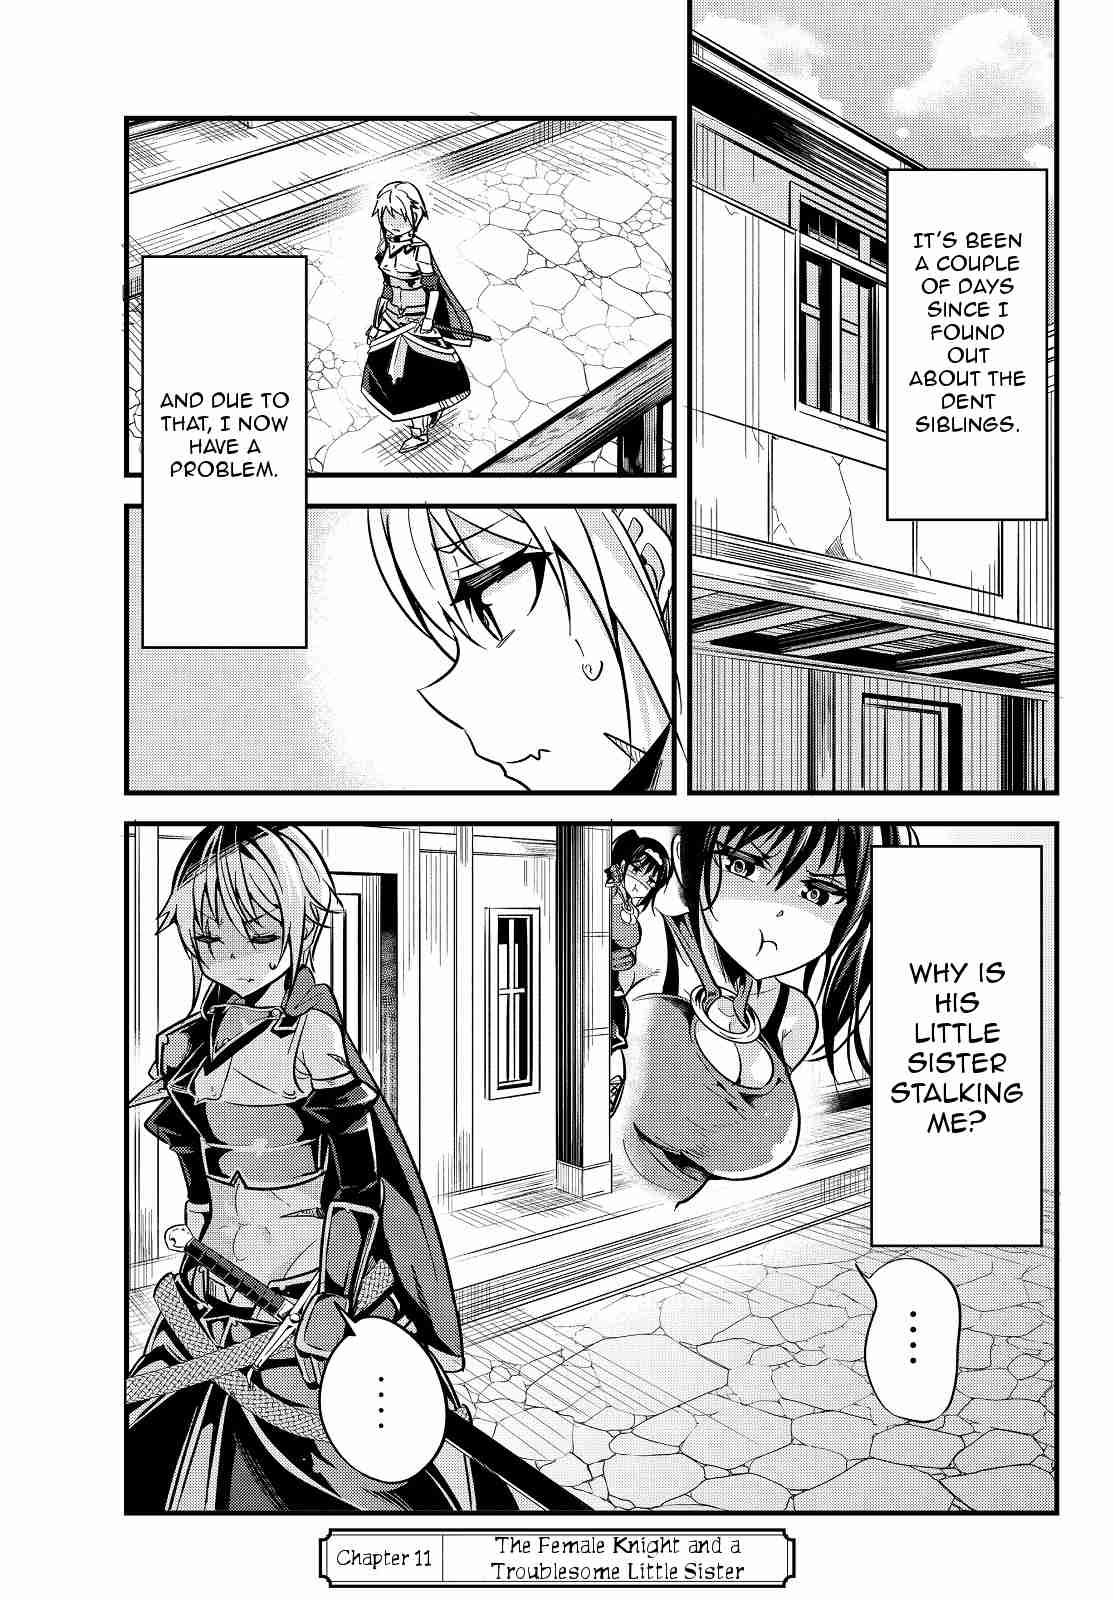 A Story About Treating a Female Knight, Who Has Never Been Treated as a Woman, as a Woman Ch. 11 The Female Knight and a Troublesome Little Sister